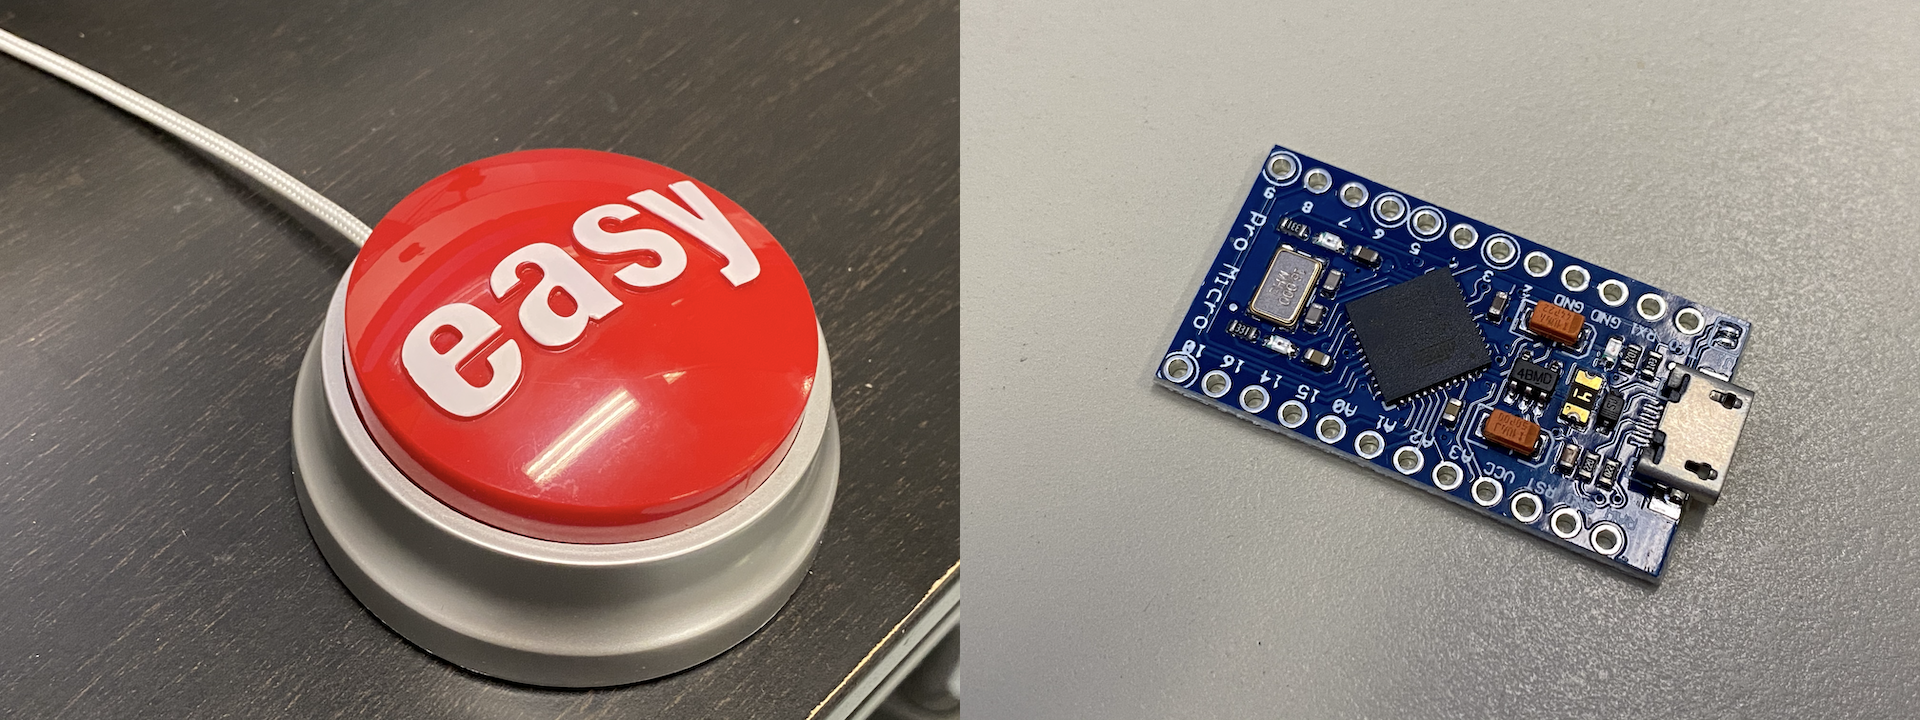 Two photos. One shows a red plastic button about the size of an adult's palm labeled with the word 'easy'. The other shows a circuitboard with I/O pins along the long edges and a metal port on one end.